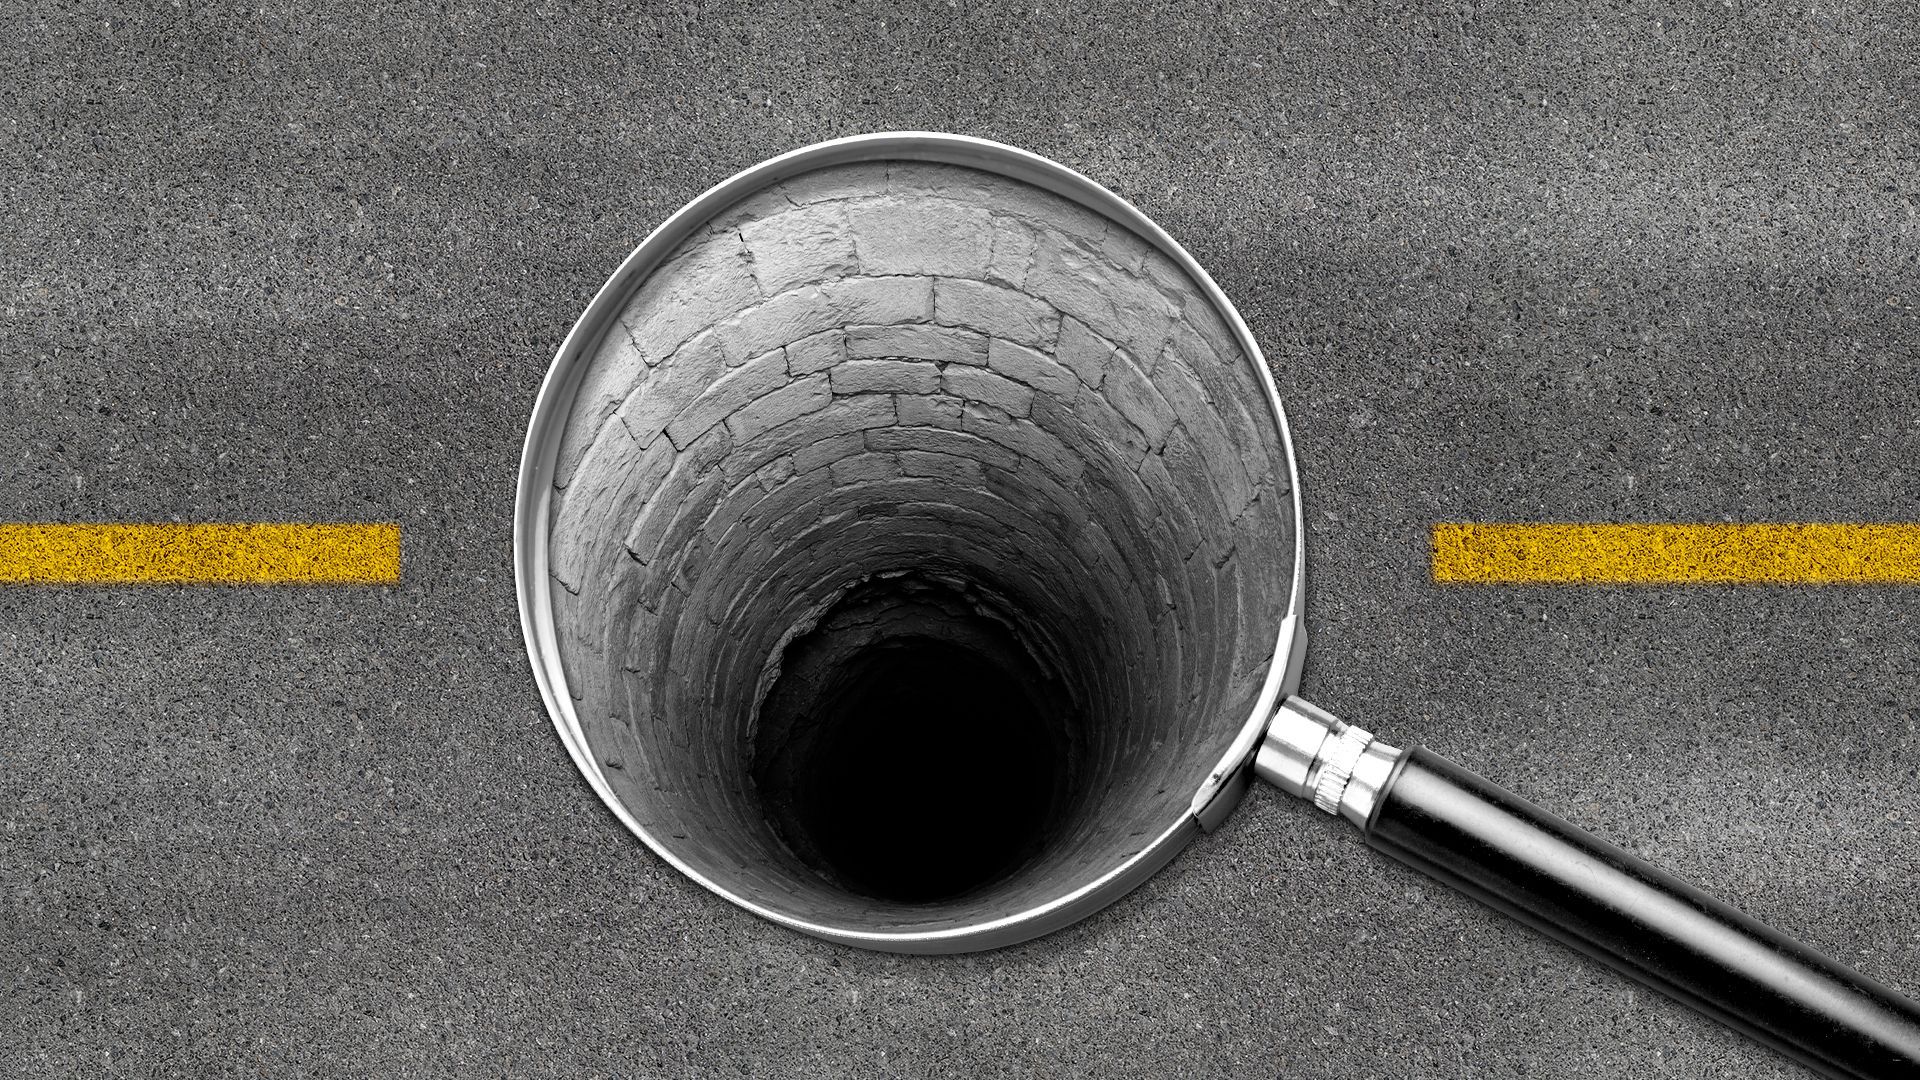 Illustration of a magnifying glass over an open sewer hole